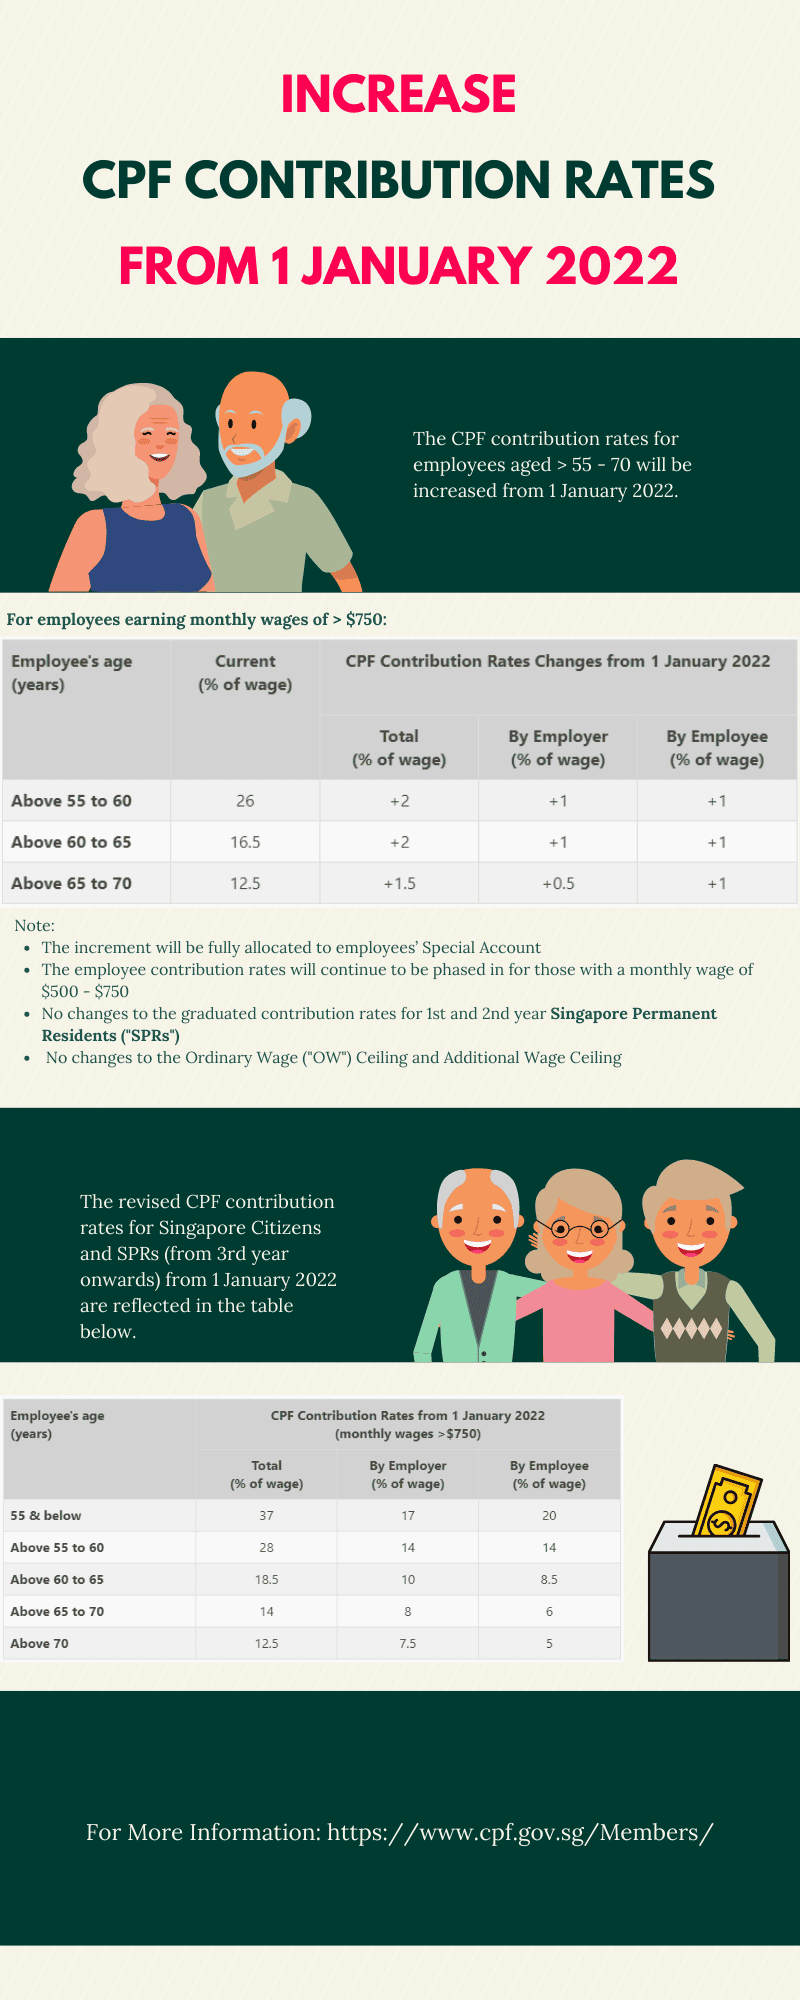 Increase in CPF Contribution Rates in 2022